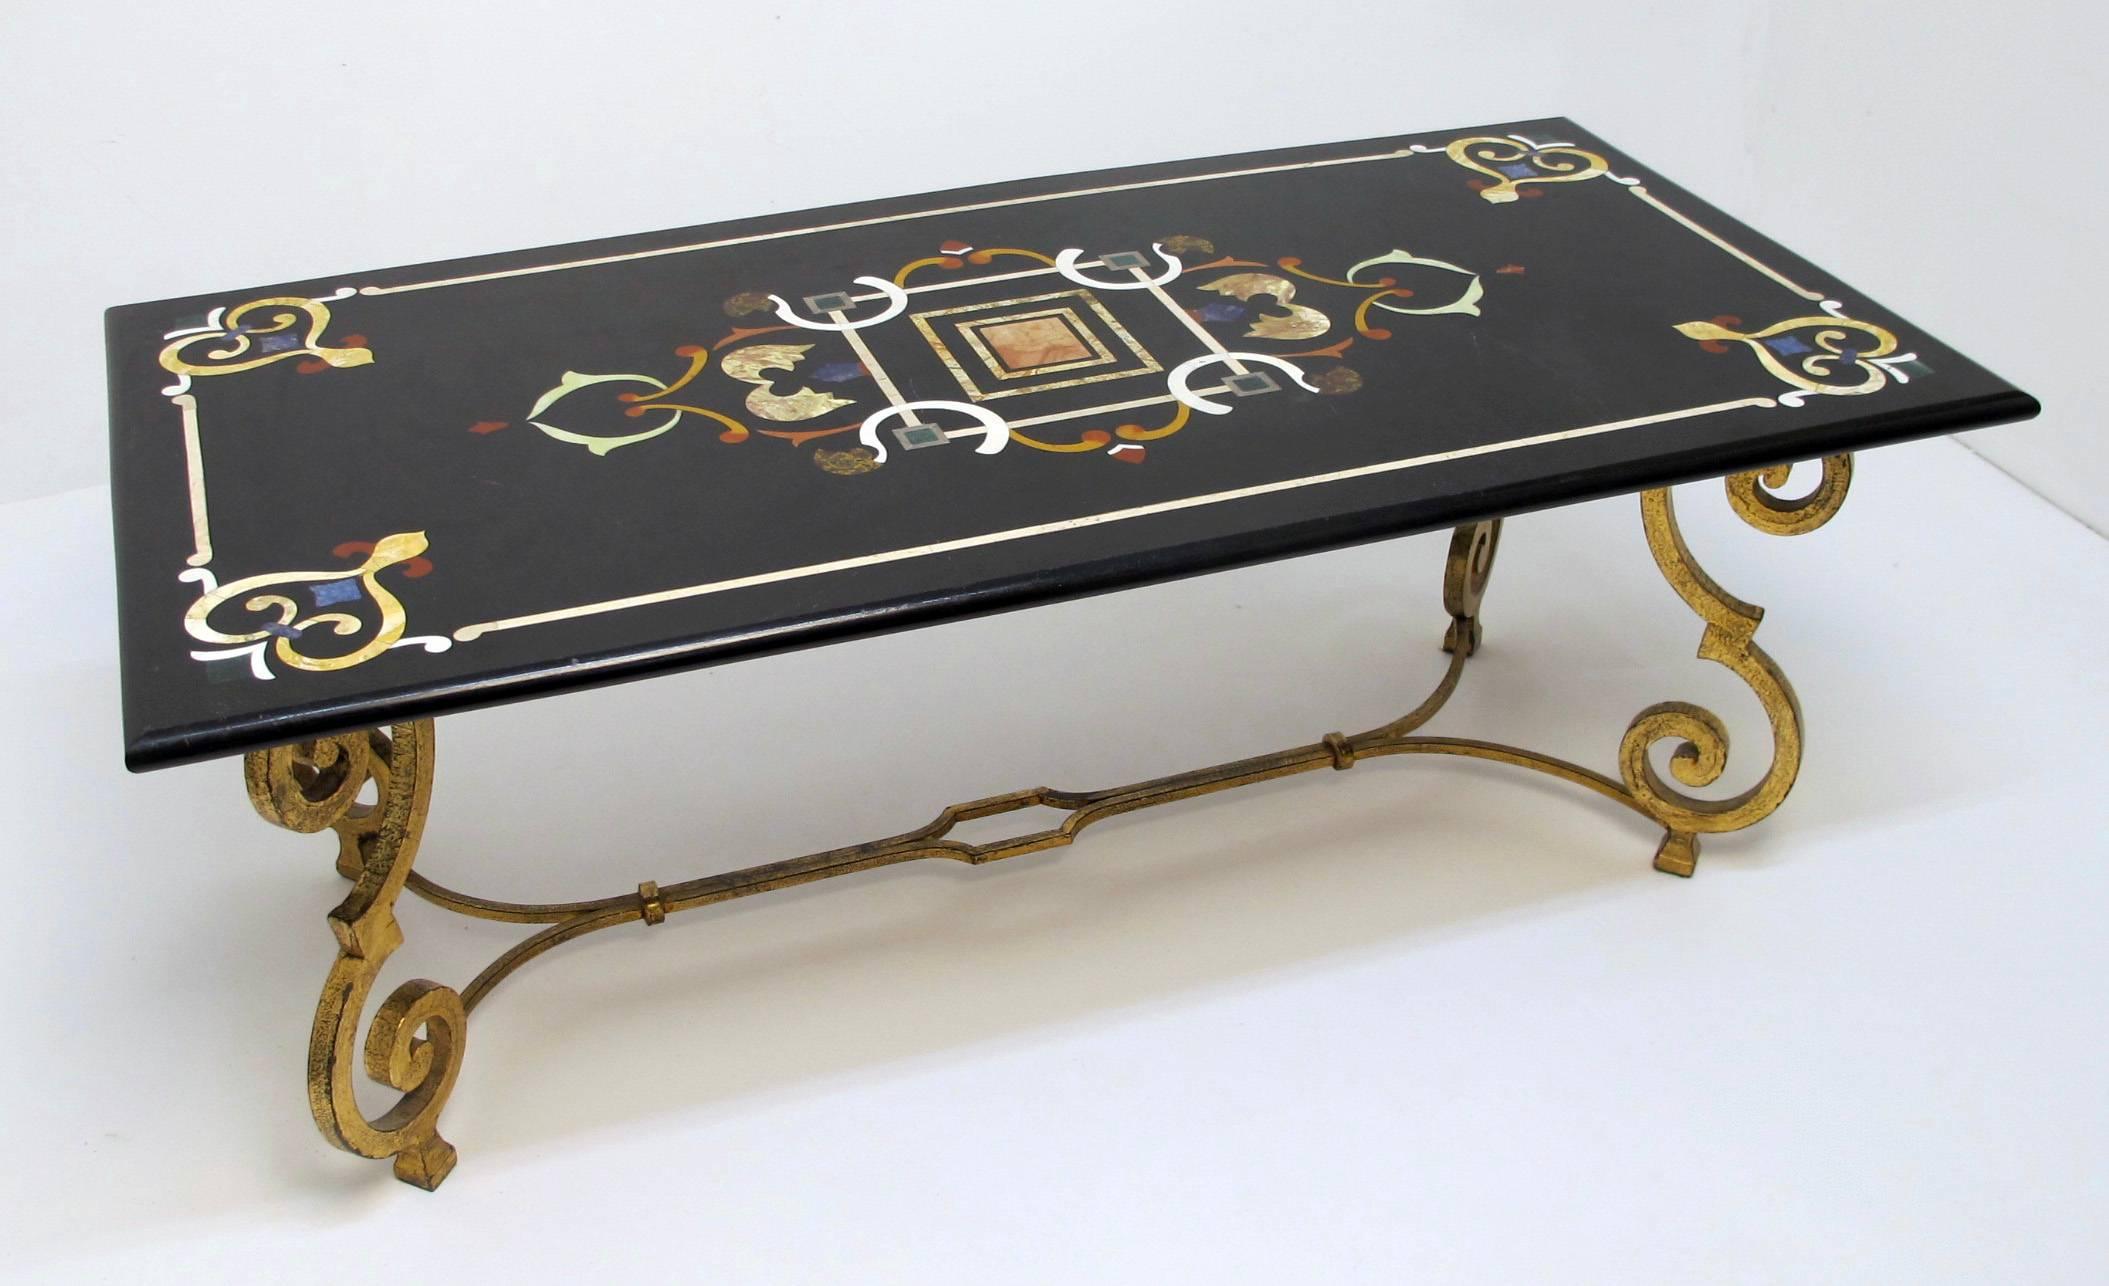 Exquisite coffee or cocktail table with beautiful gilt wrought base and pieta dura (inlaid stone) top, Italy, mid-20th century.